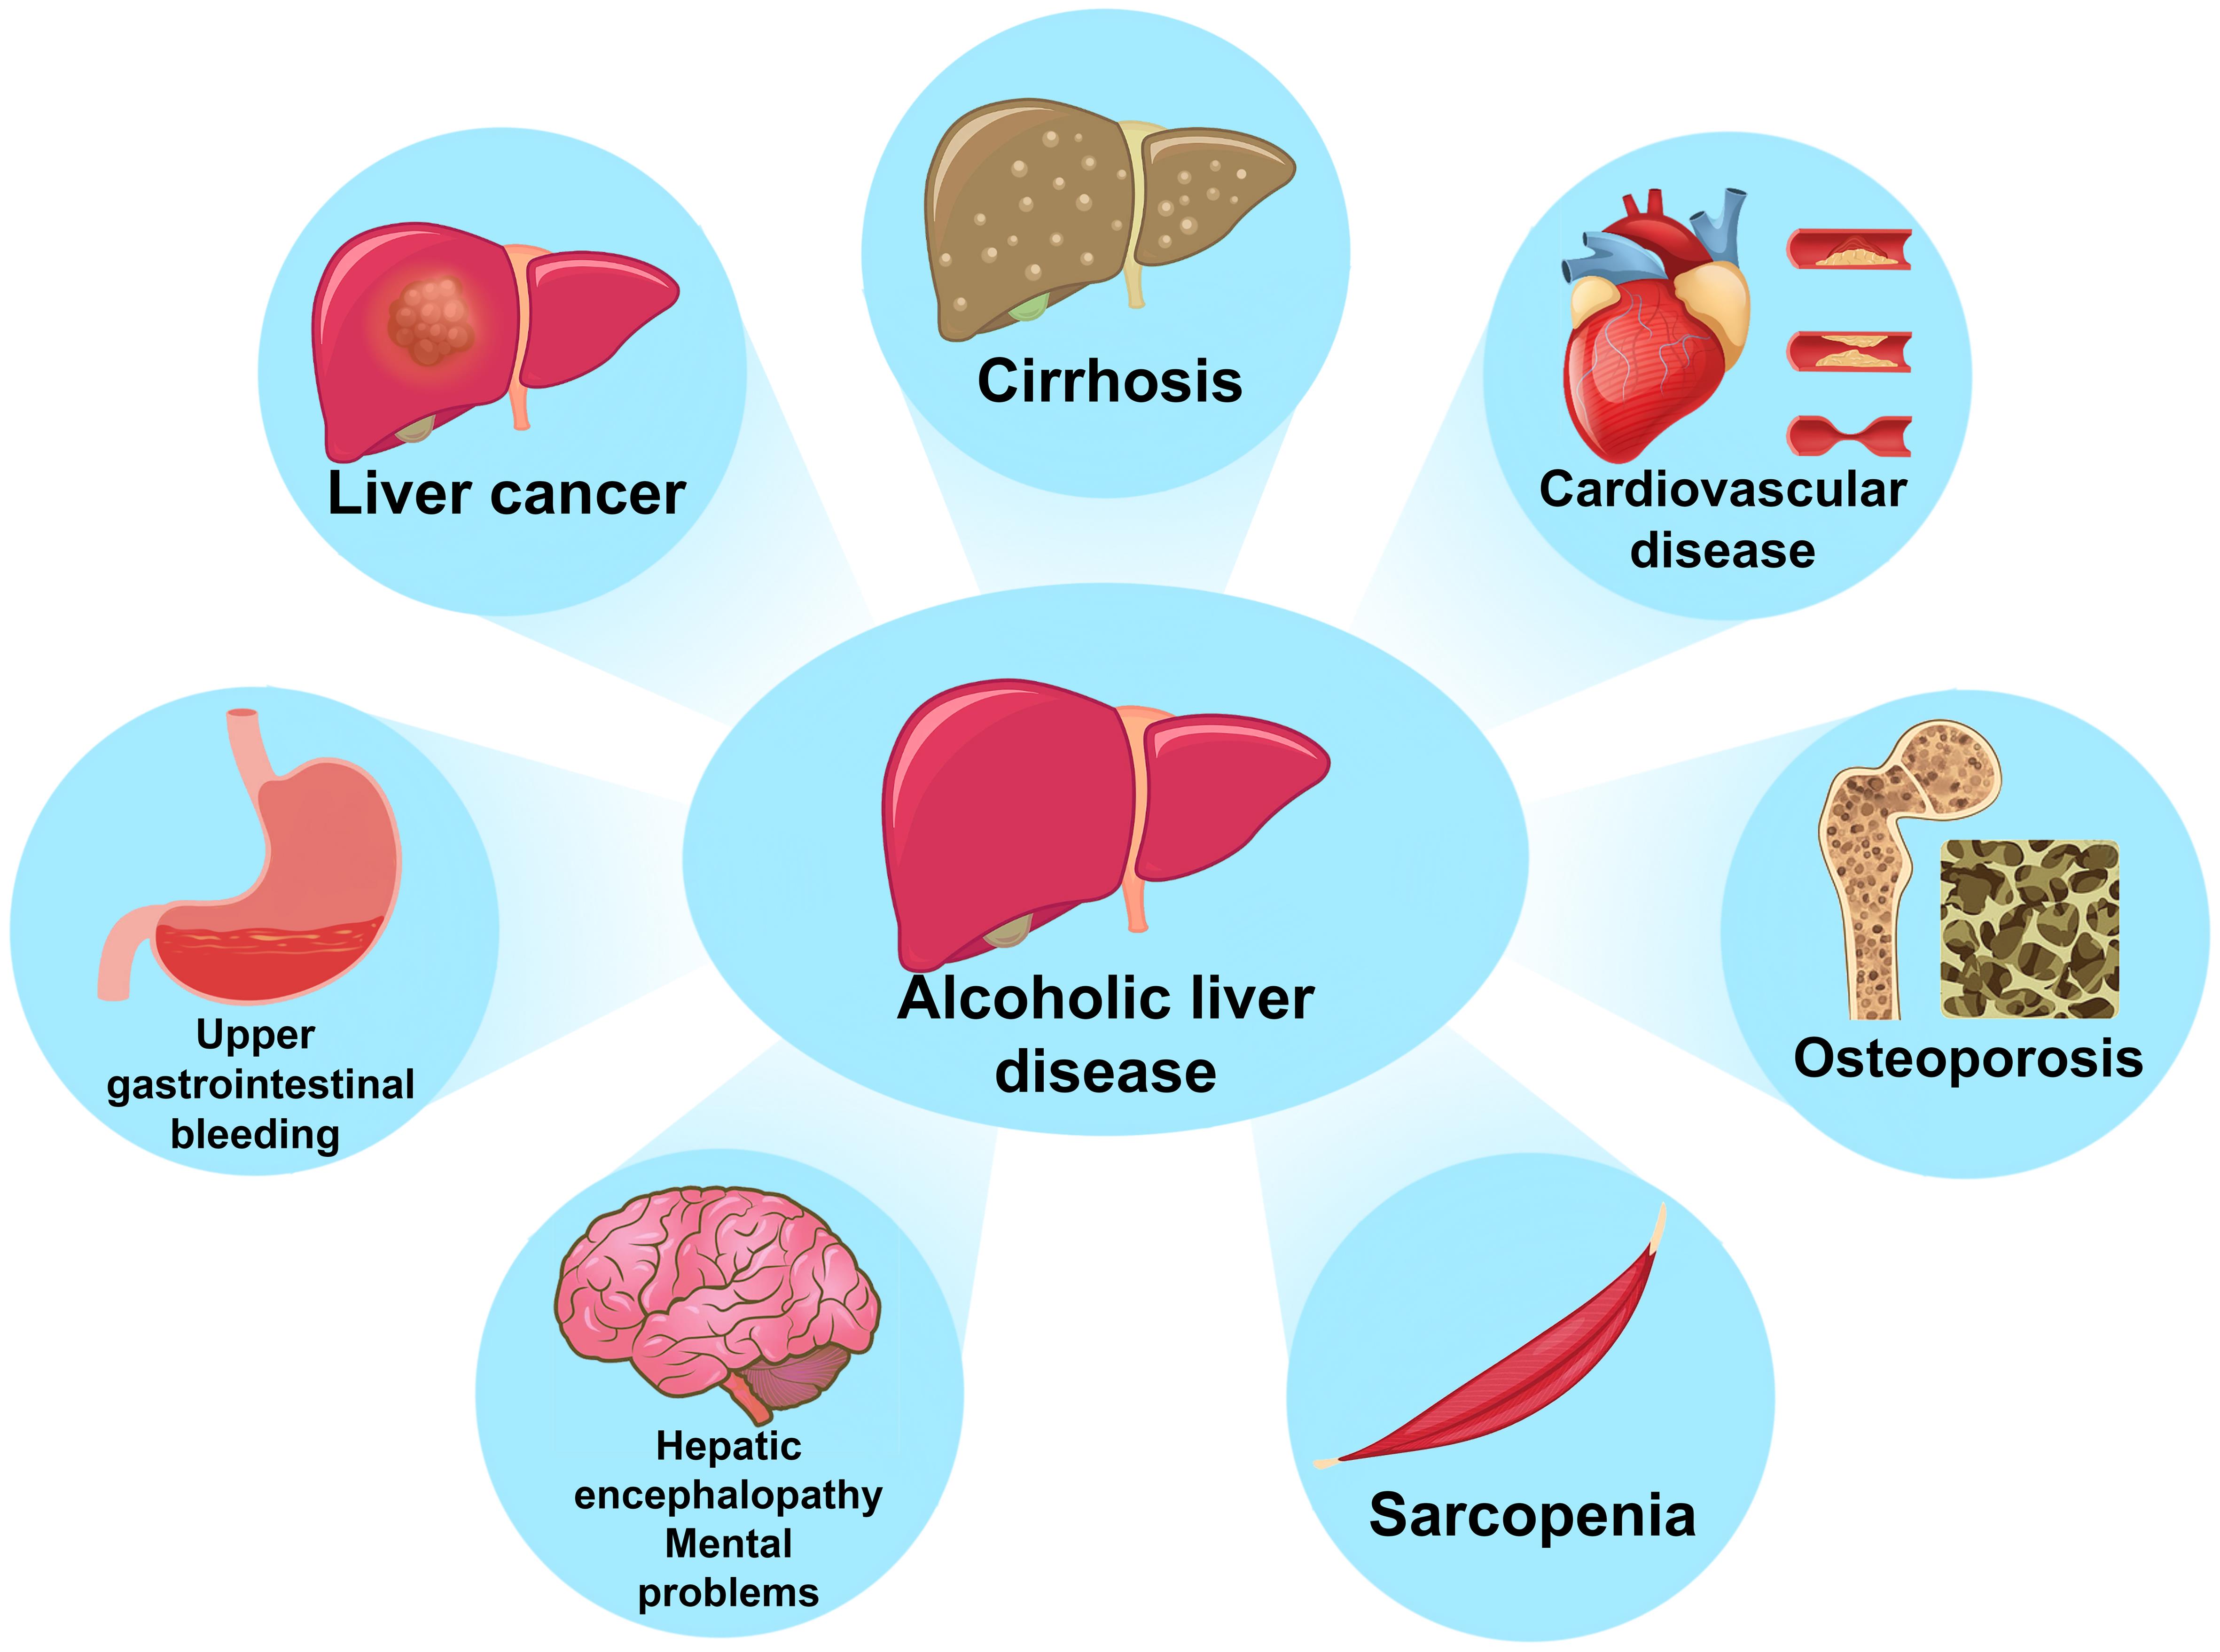 Complications associated with alcoholic liver disease.